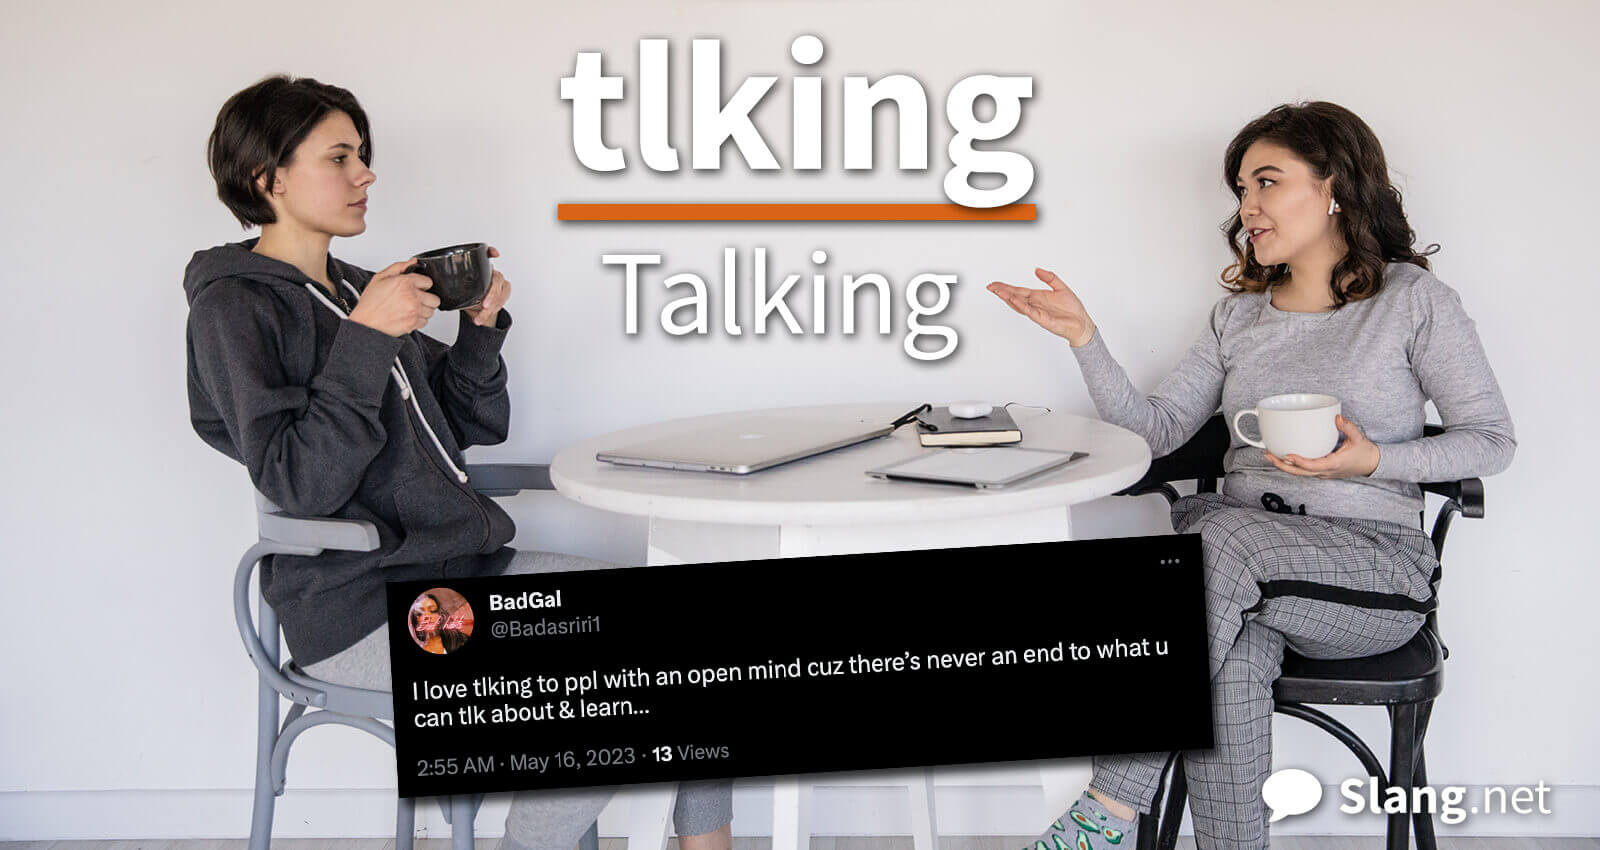 While tlking is barely an abbreviation, many people still use it in messages and online